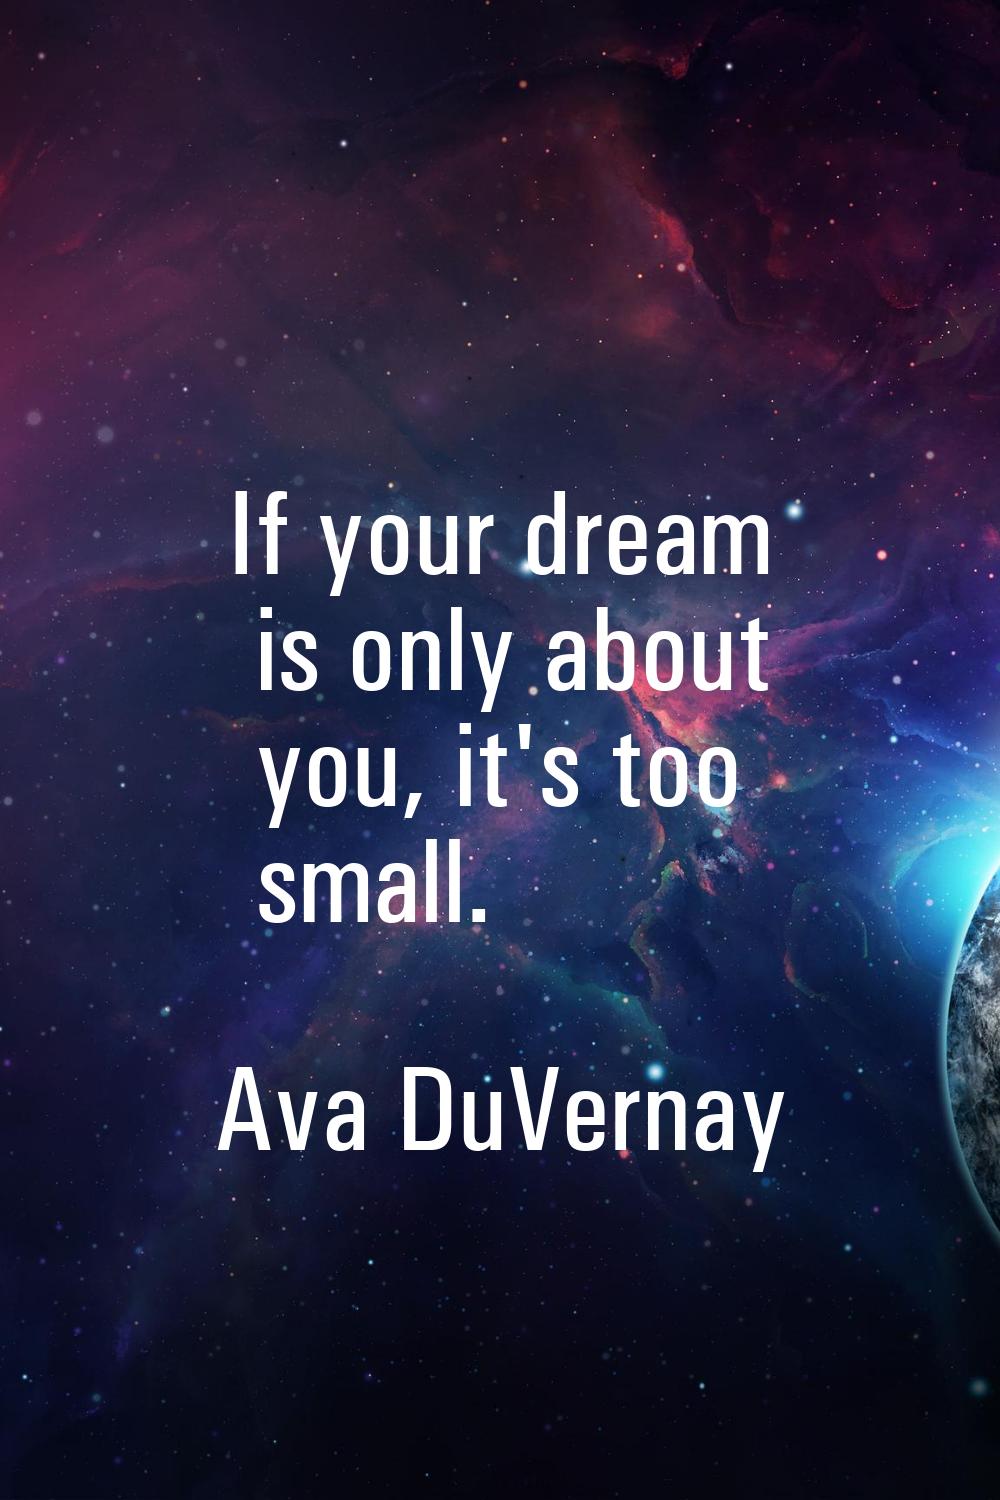 If your dream is only about you, it's too small.